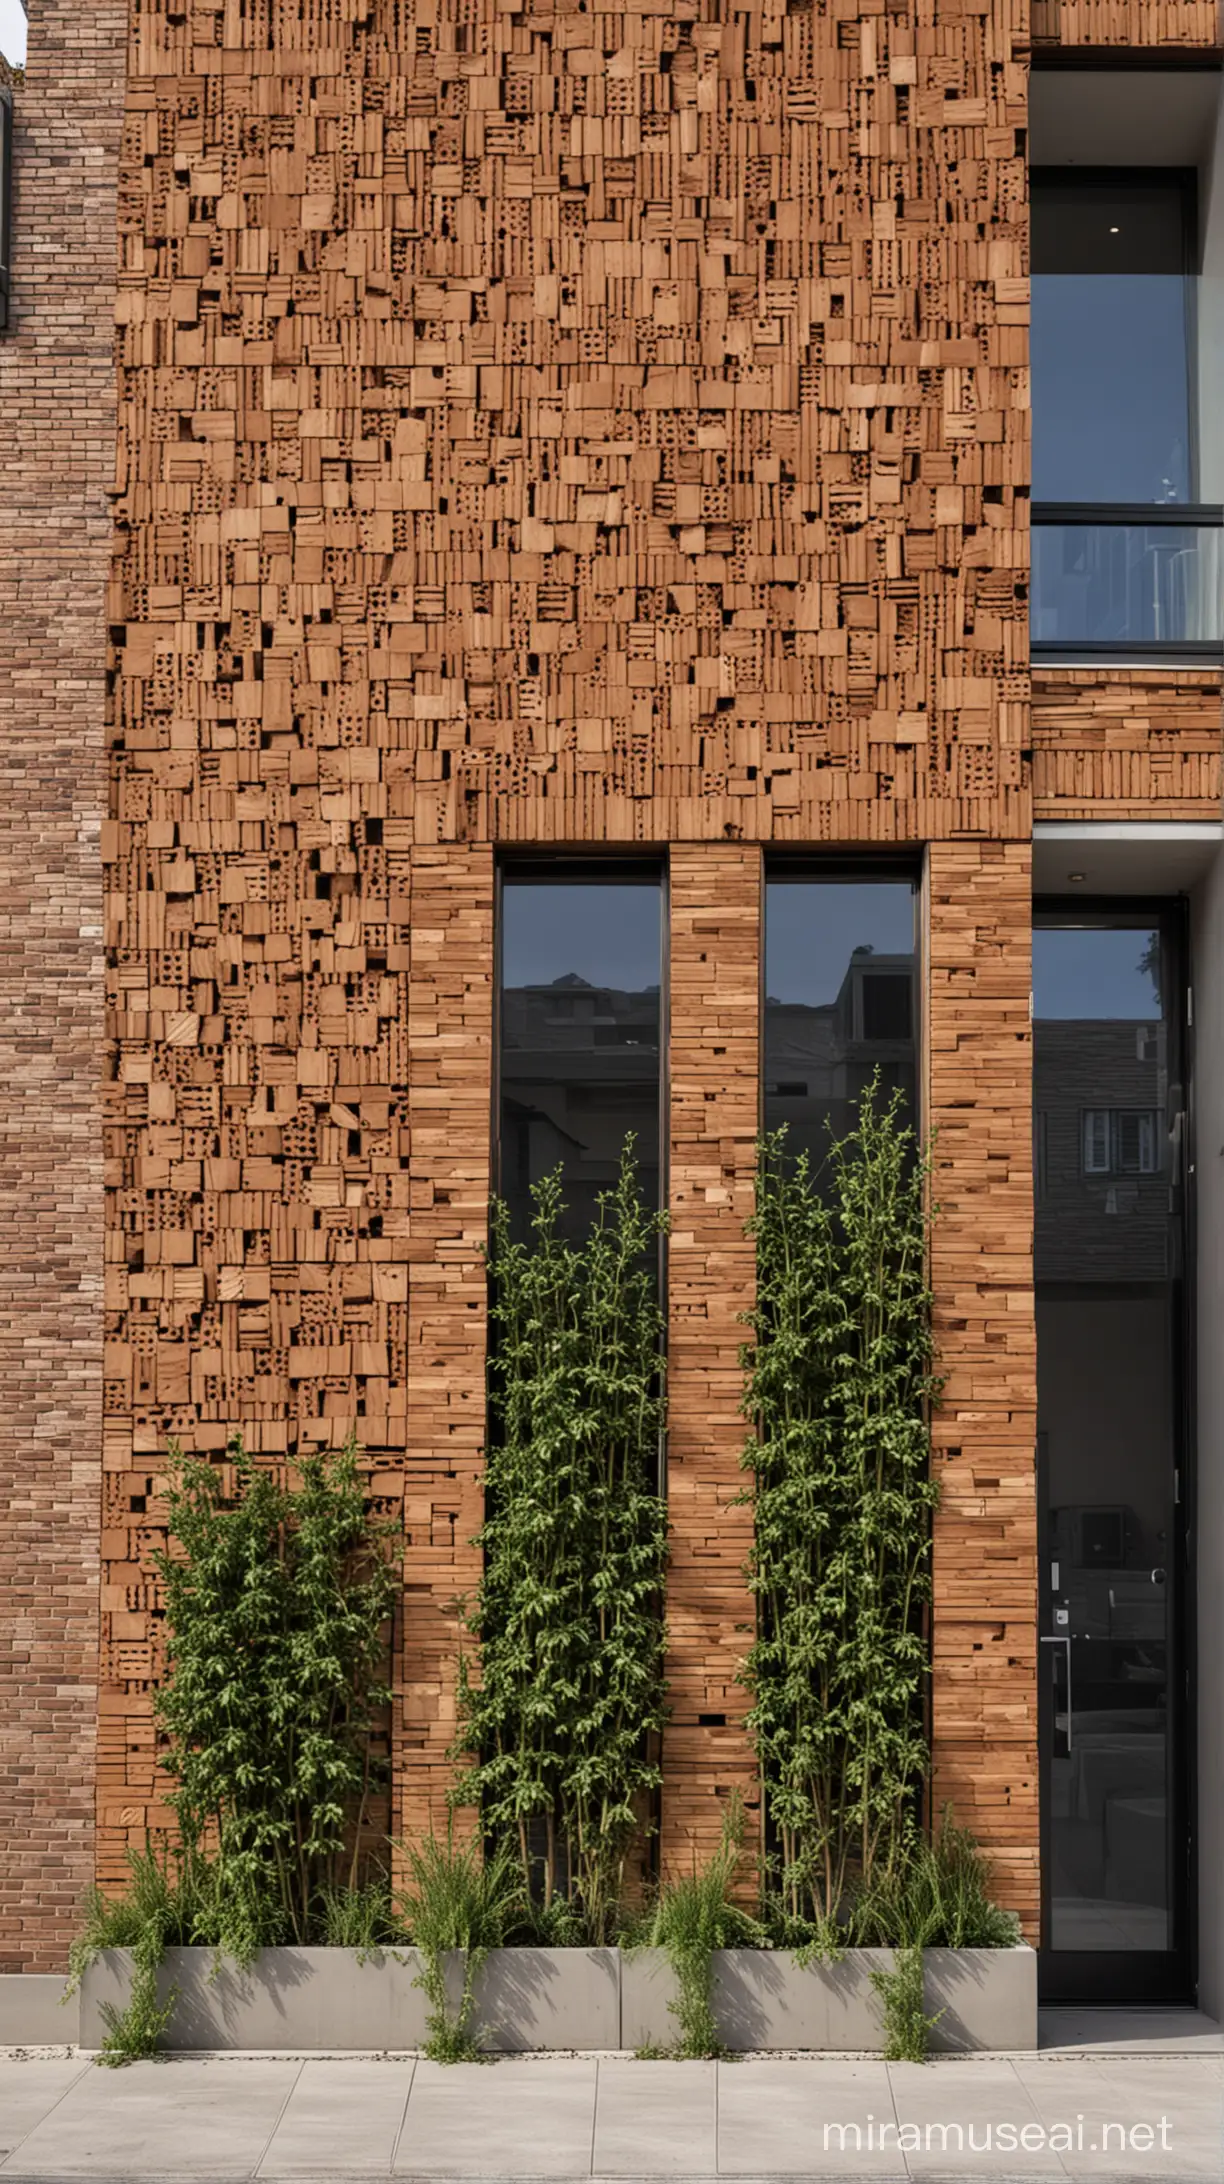 Modern Facade Design with Wood Brick and Concrete Panels Featuring KitKat Style and Plant Accents